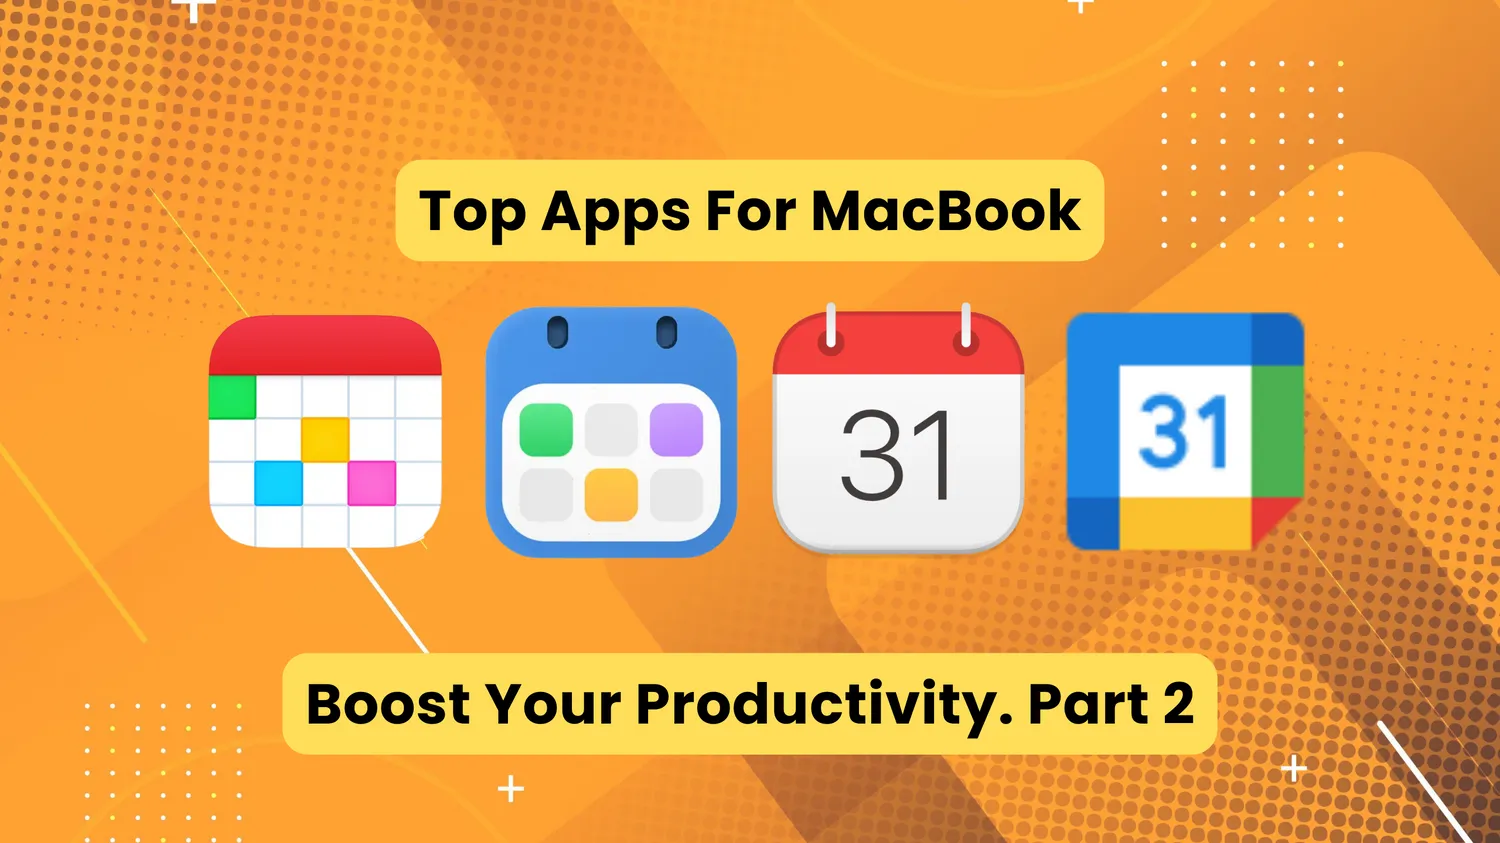 Boost Your Productivity with Top Apps for MacBook. Calendars Apps Logos